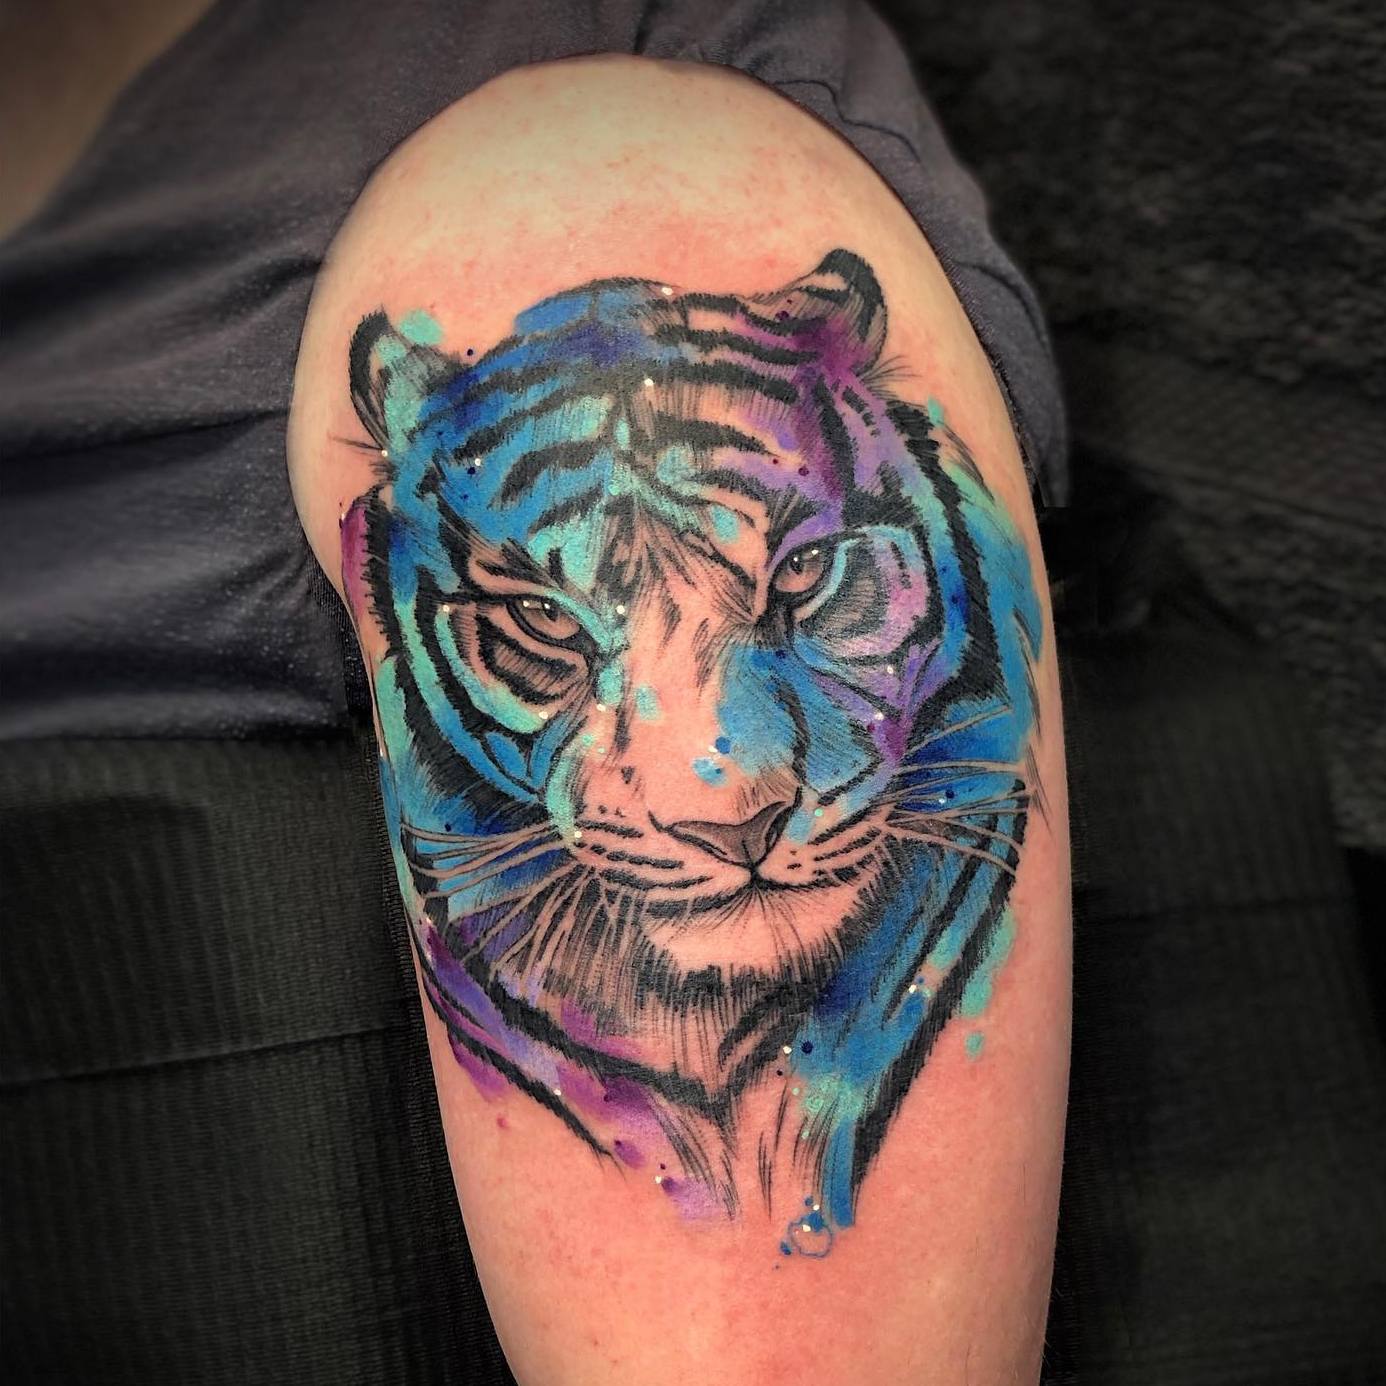 Watercolor Tattoo Magic - 60 Captivating Ideas for Your Unique Expression